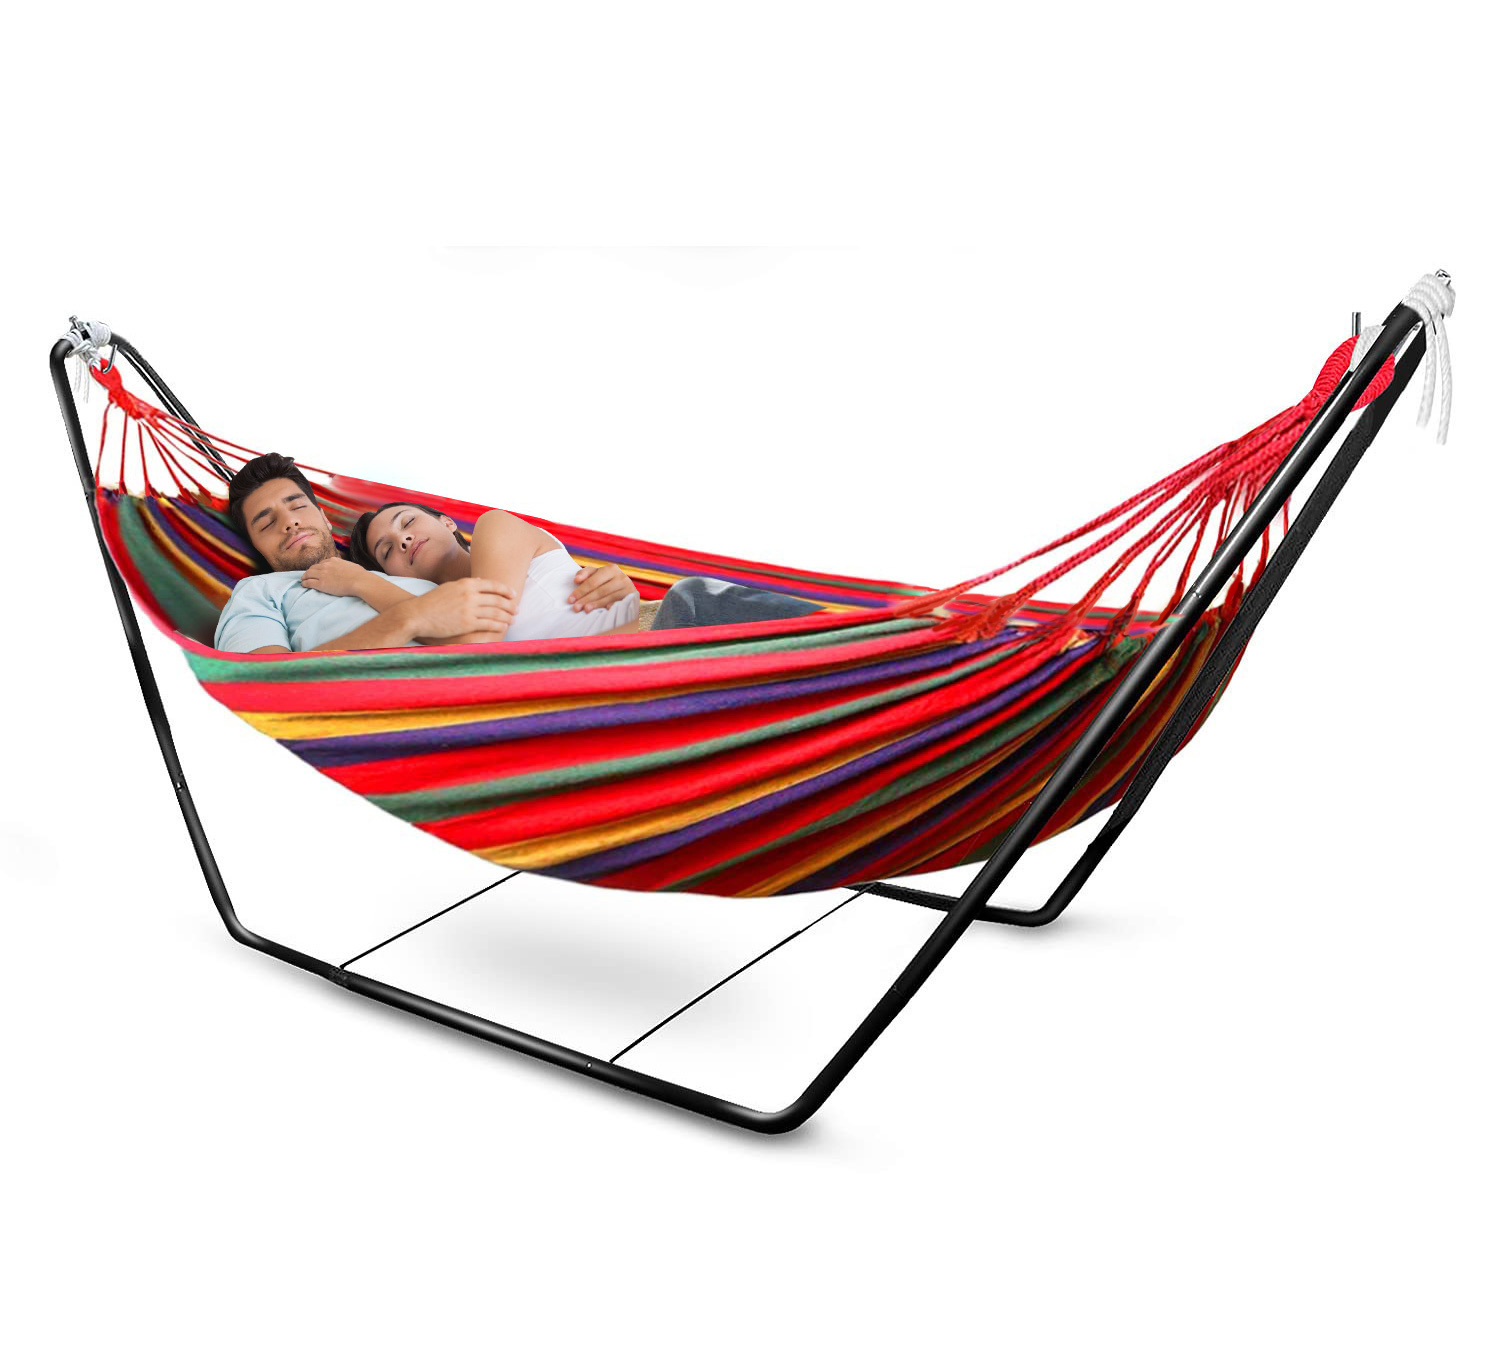 Deluxe Double Hammock and Premium Steel Stand Combo Set (Red)